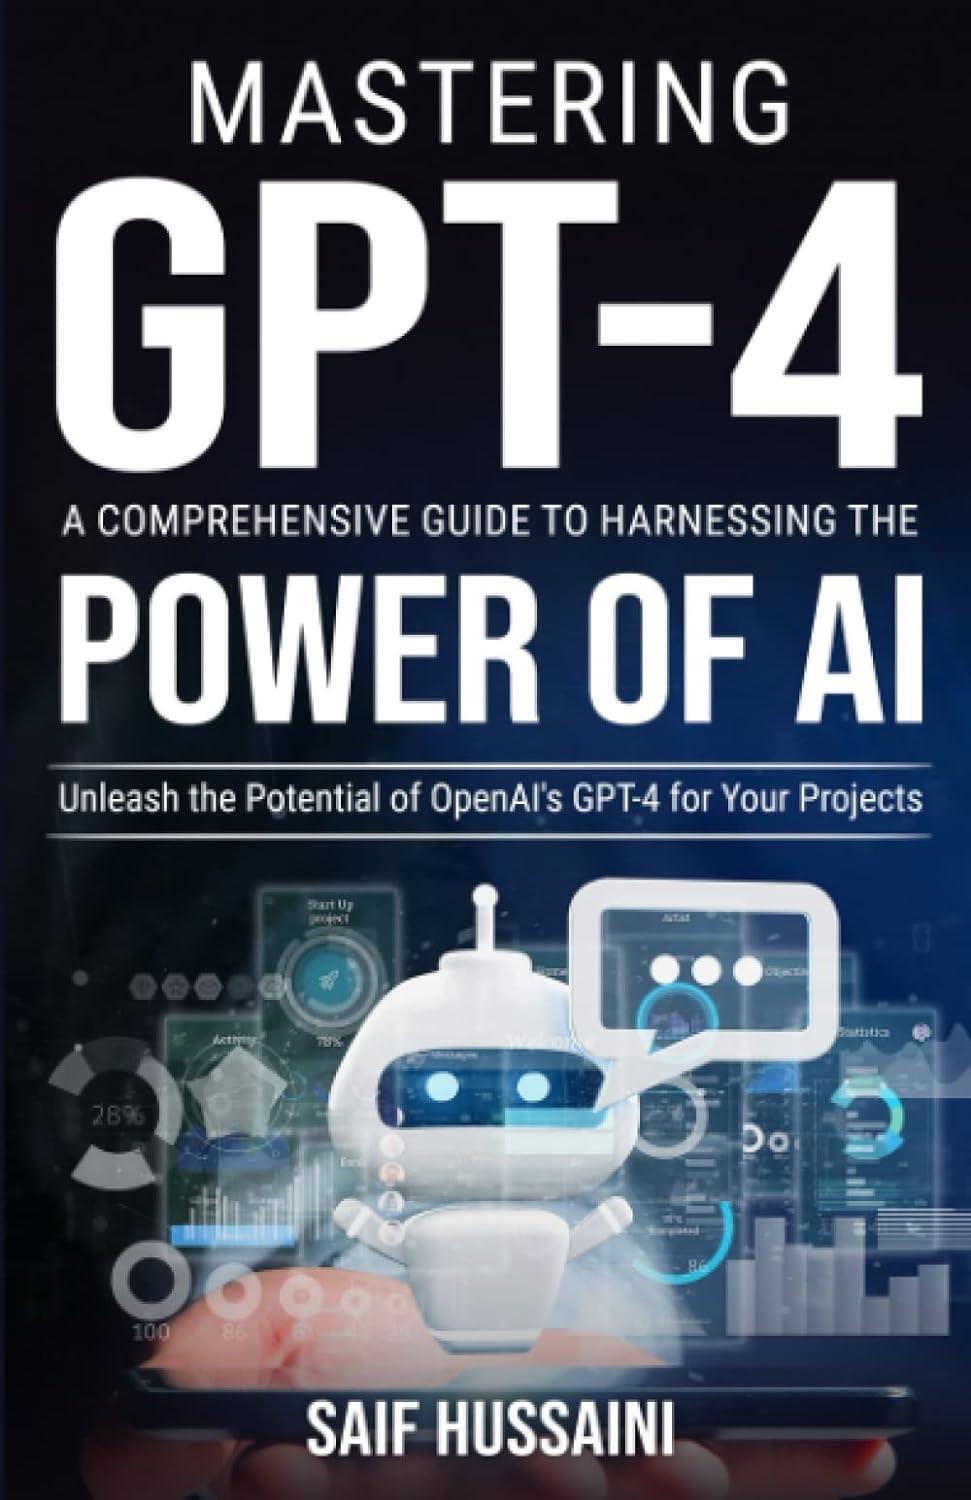 Mastering GPT-4 A Comprehensive Guide To Harnessing The Power Of AI Unleash The Potential Of OpenAI's GPT-4 For Your Projects